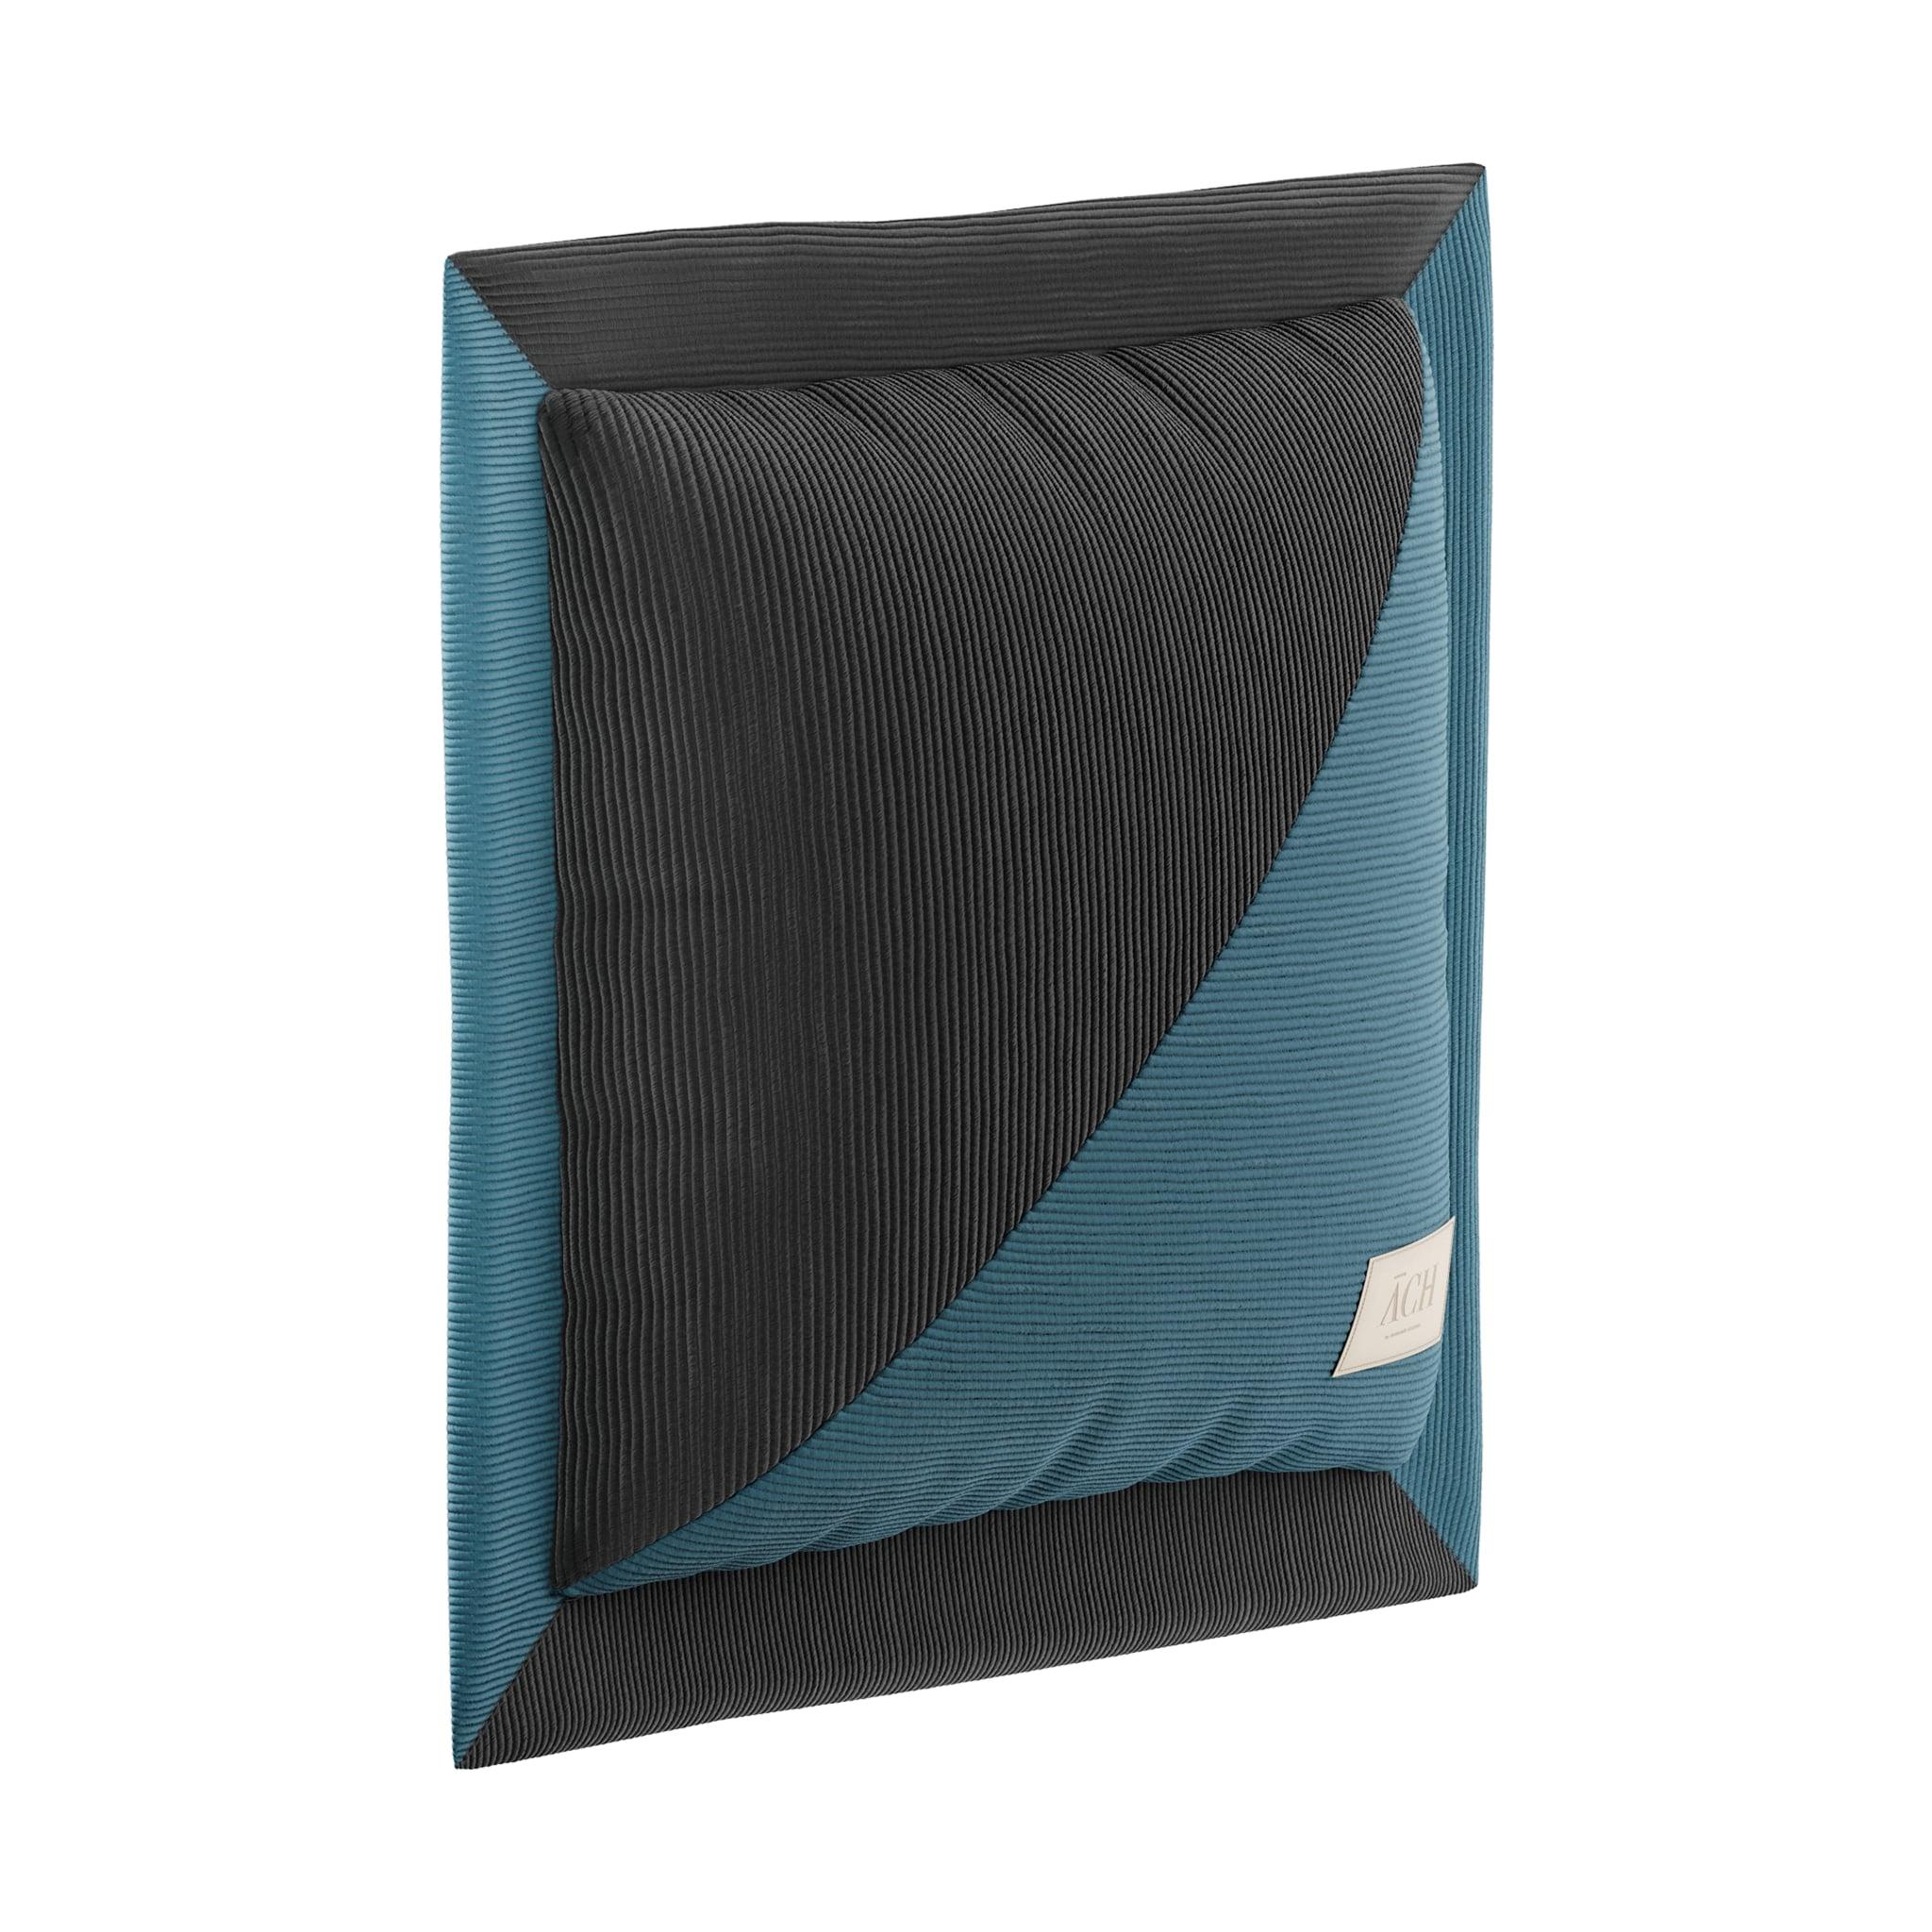 Blue/Black Corduroy Decorative Throw Pillow, Luxury Modern Navy Cushion
Black Navy Square is a decorative flange pillow with a clever construction of two colors of corduroy, a moonlight black and a woody green. 
This refined and fun patchwork